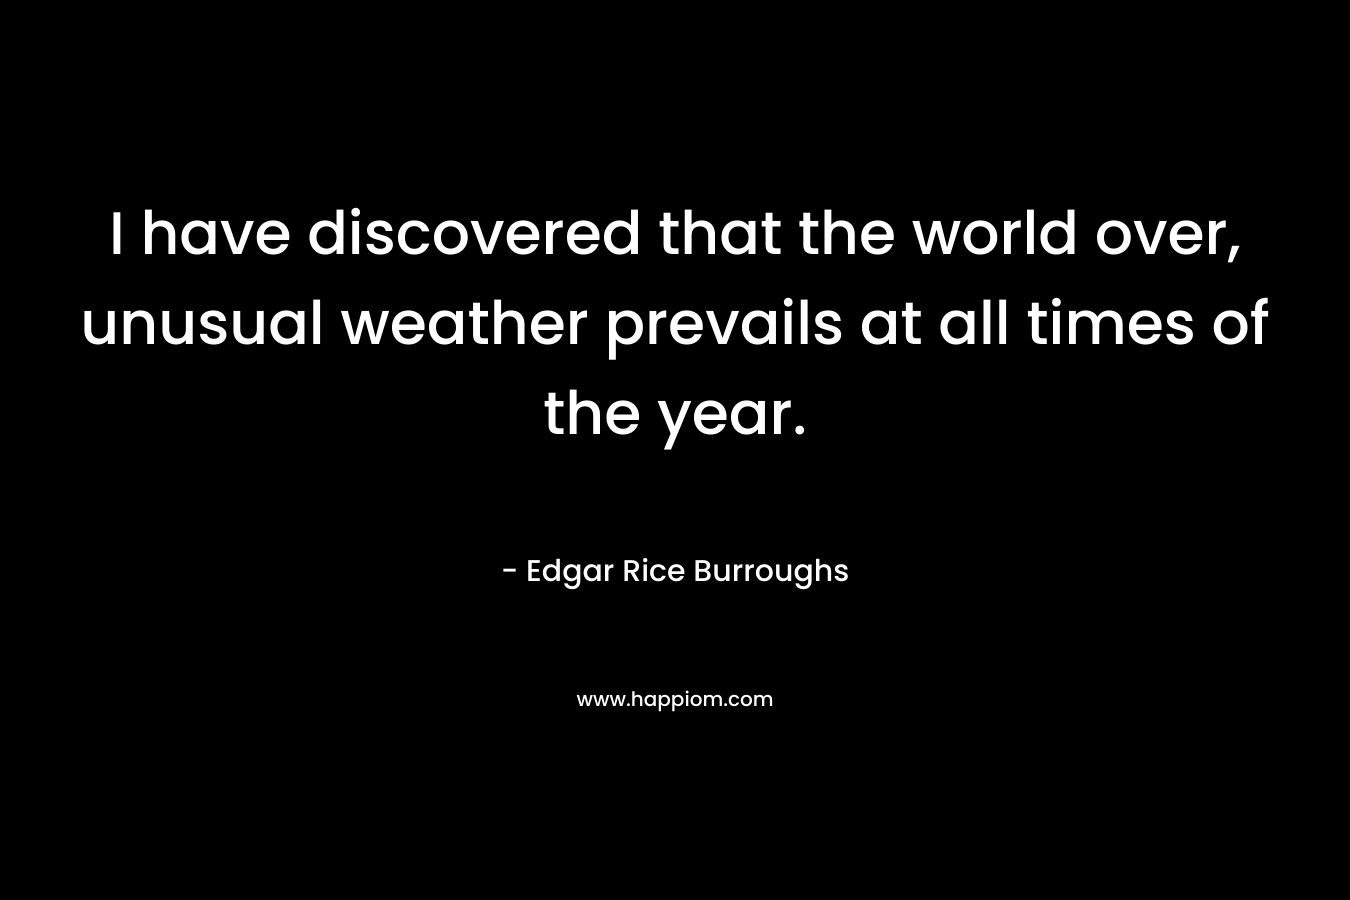 I have discovered that the world over, unusual weather prevails at all times of the year. – Edgar Rice Burroughs